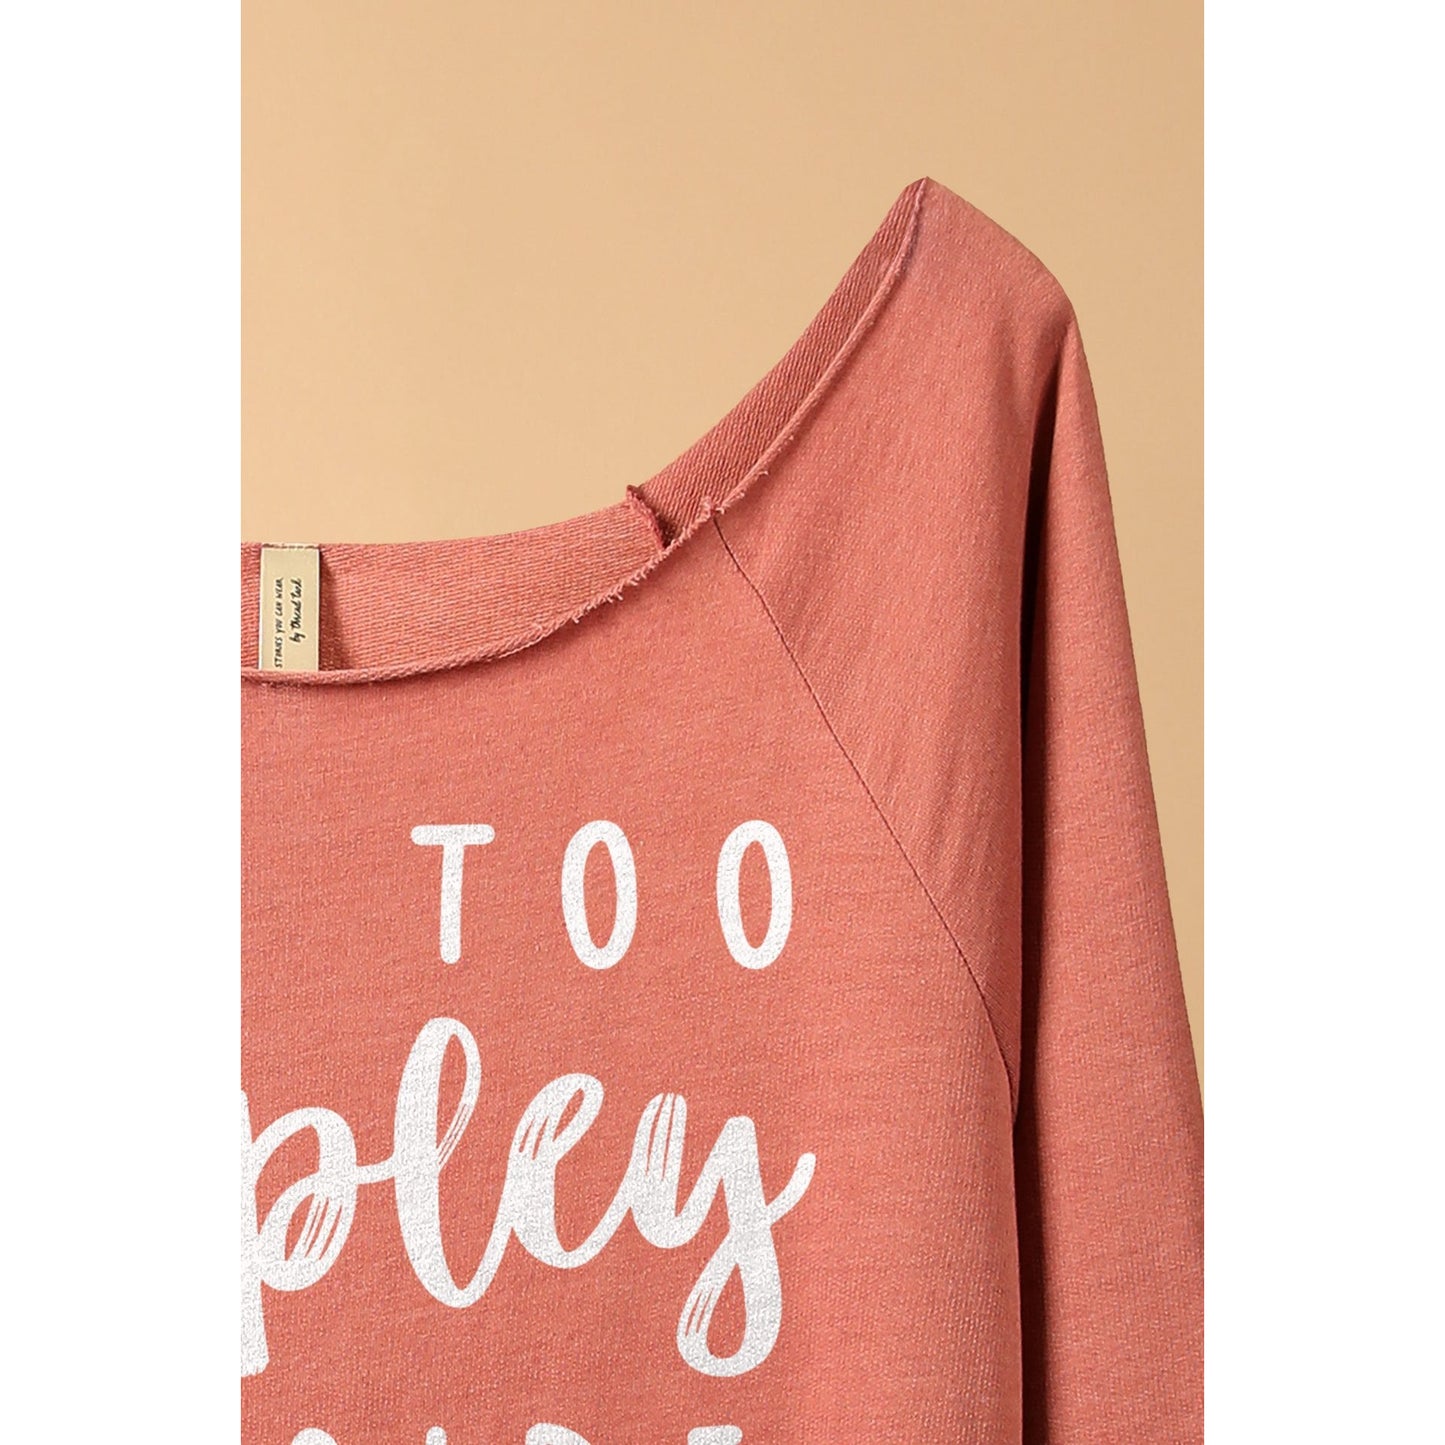 Its Too Peopley Outside - threadtank | stories you can wear